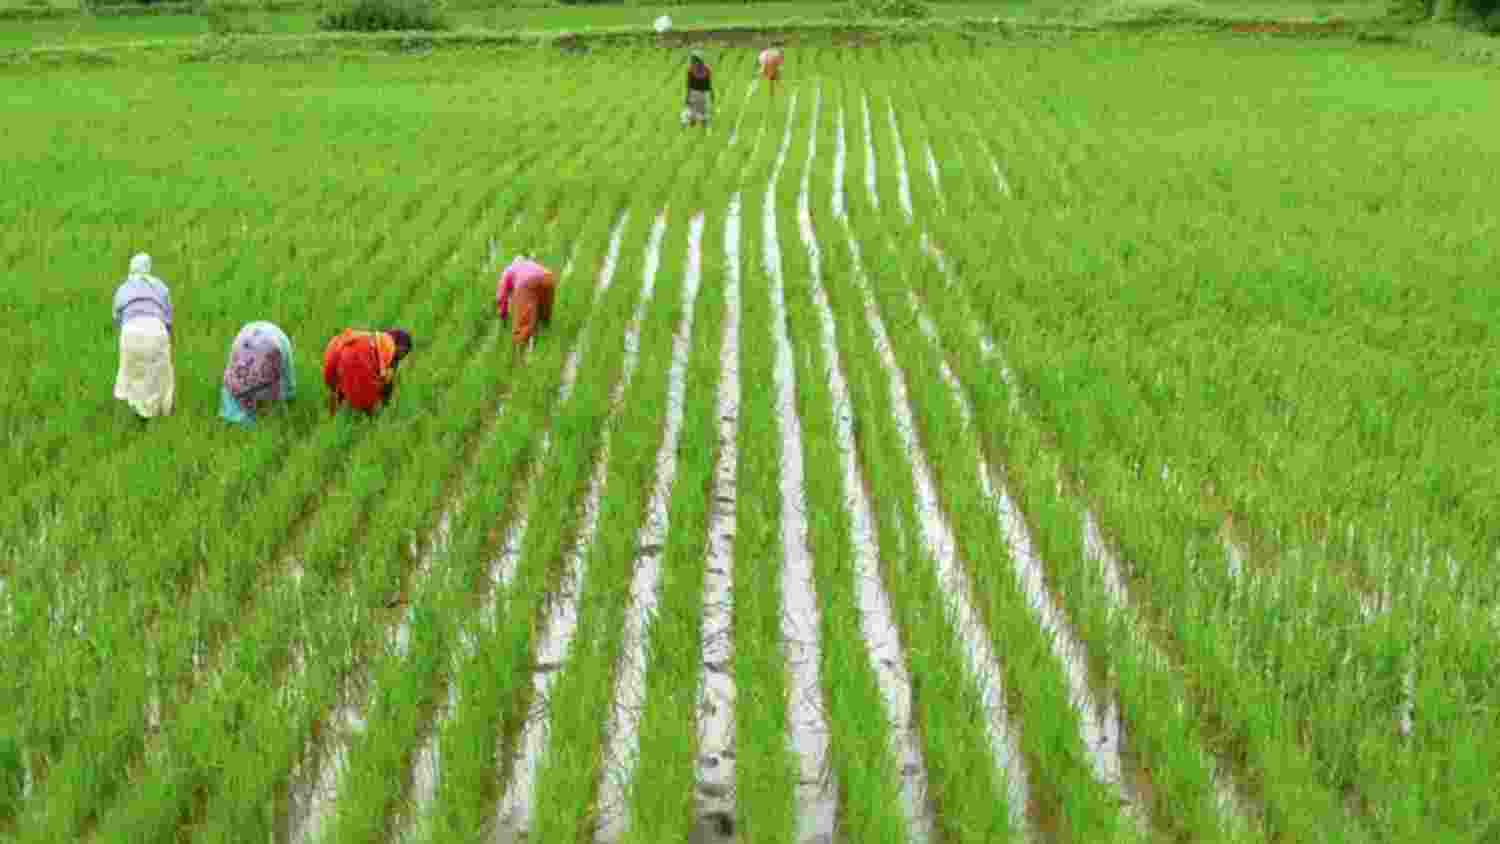 IMD predicts above-normal rainfall boosting agricultural prospects